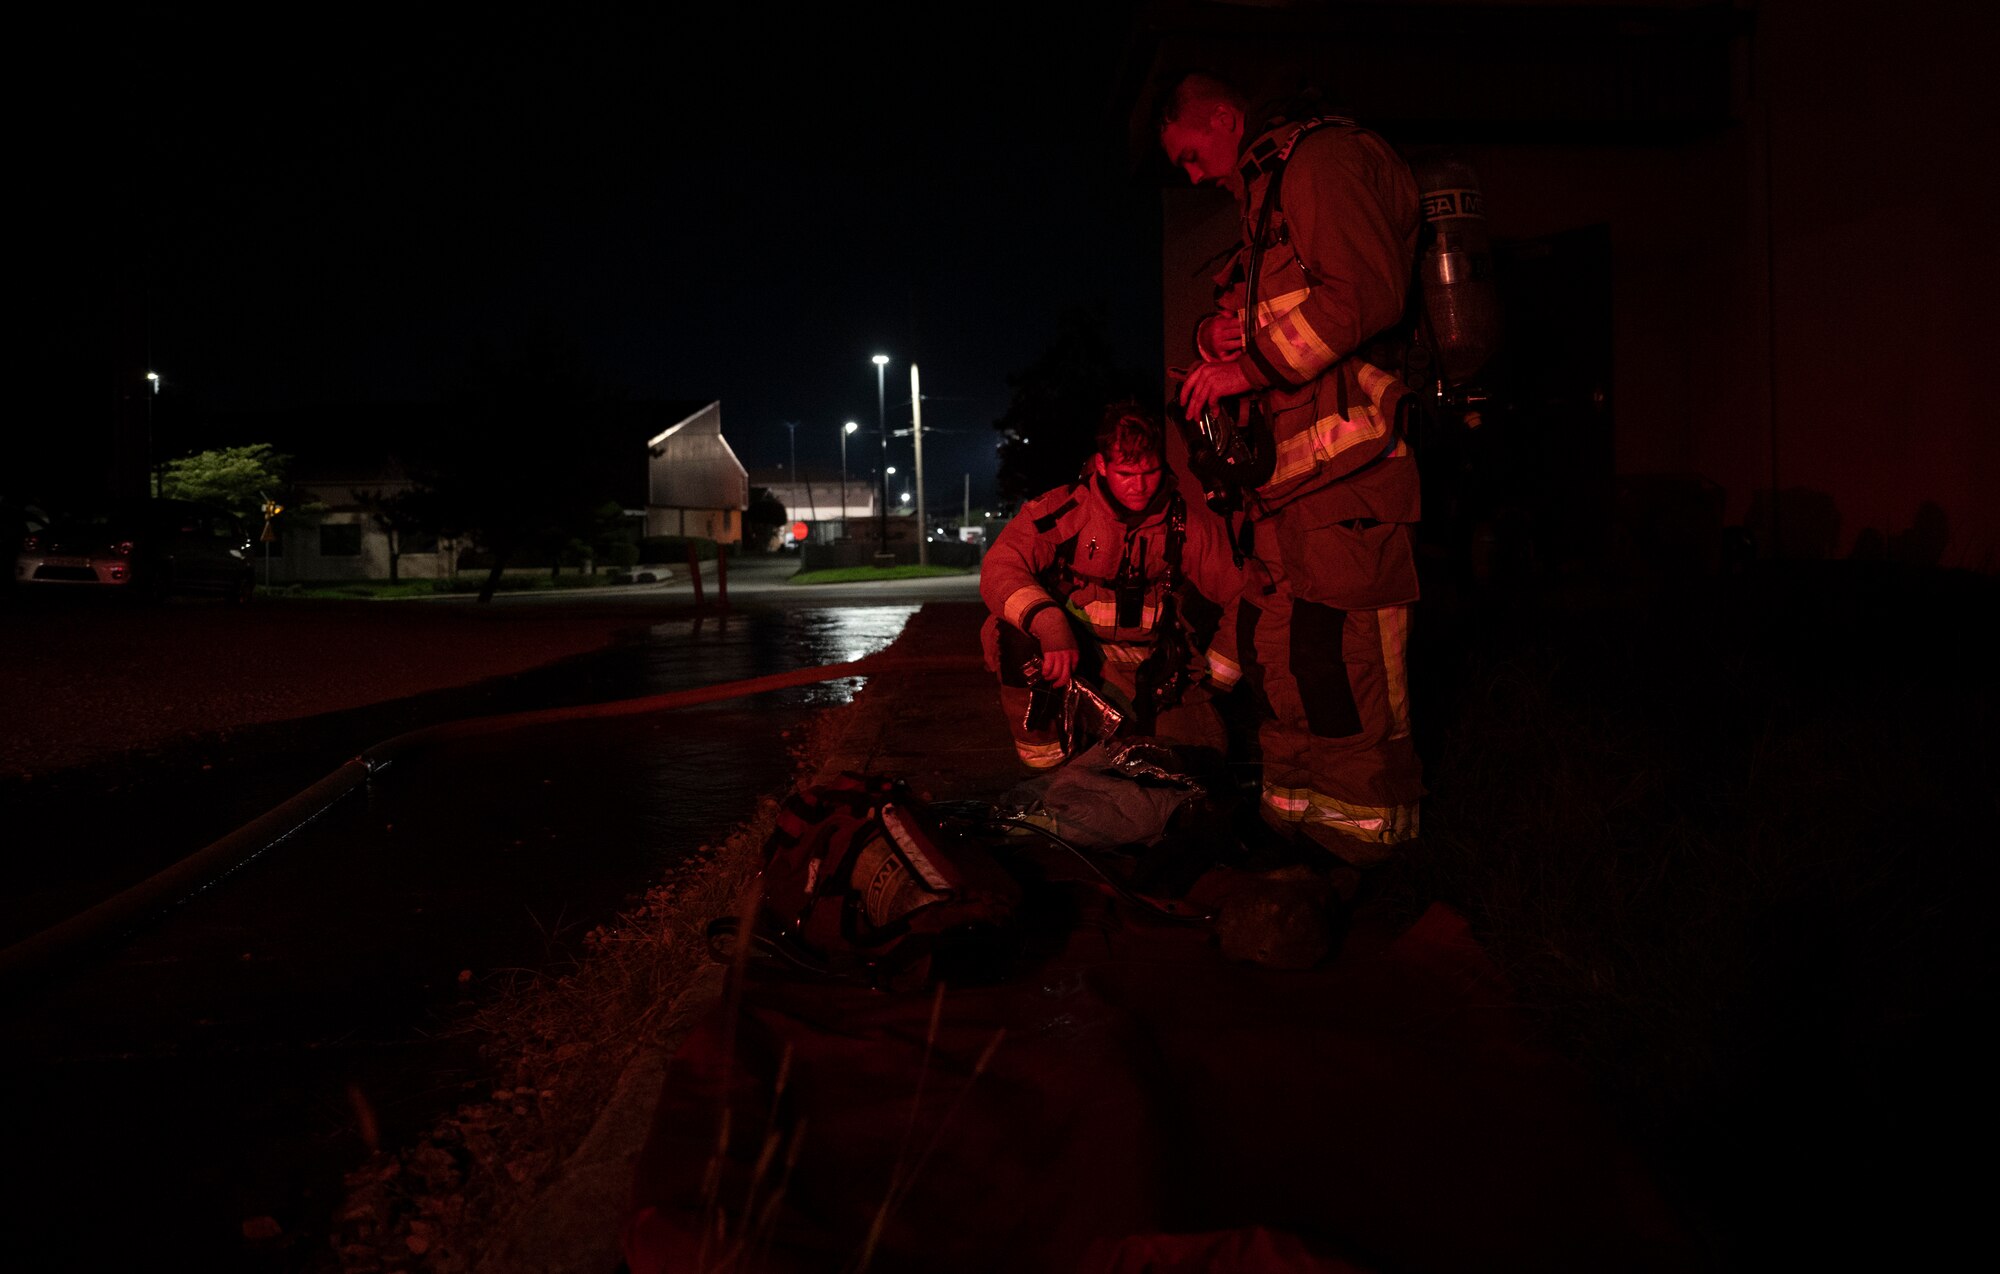 U.S. Air Force Firefighters assigned to the 51st Civil Engineer Squadron (CES) remove their gear after a fire response training scenario at Osan Air Base, Republic of Korea, Sept. 14, 2022.